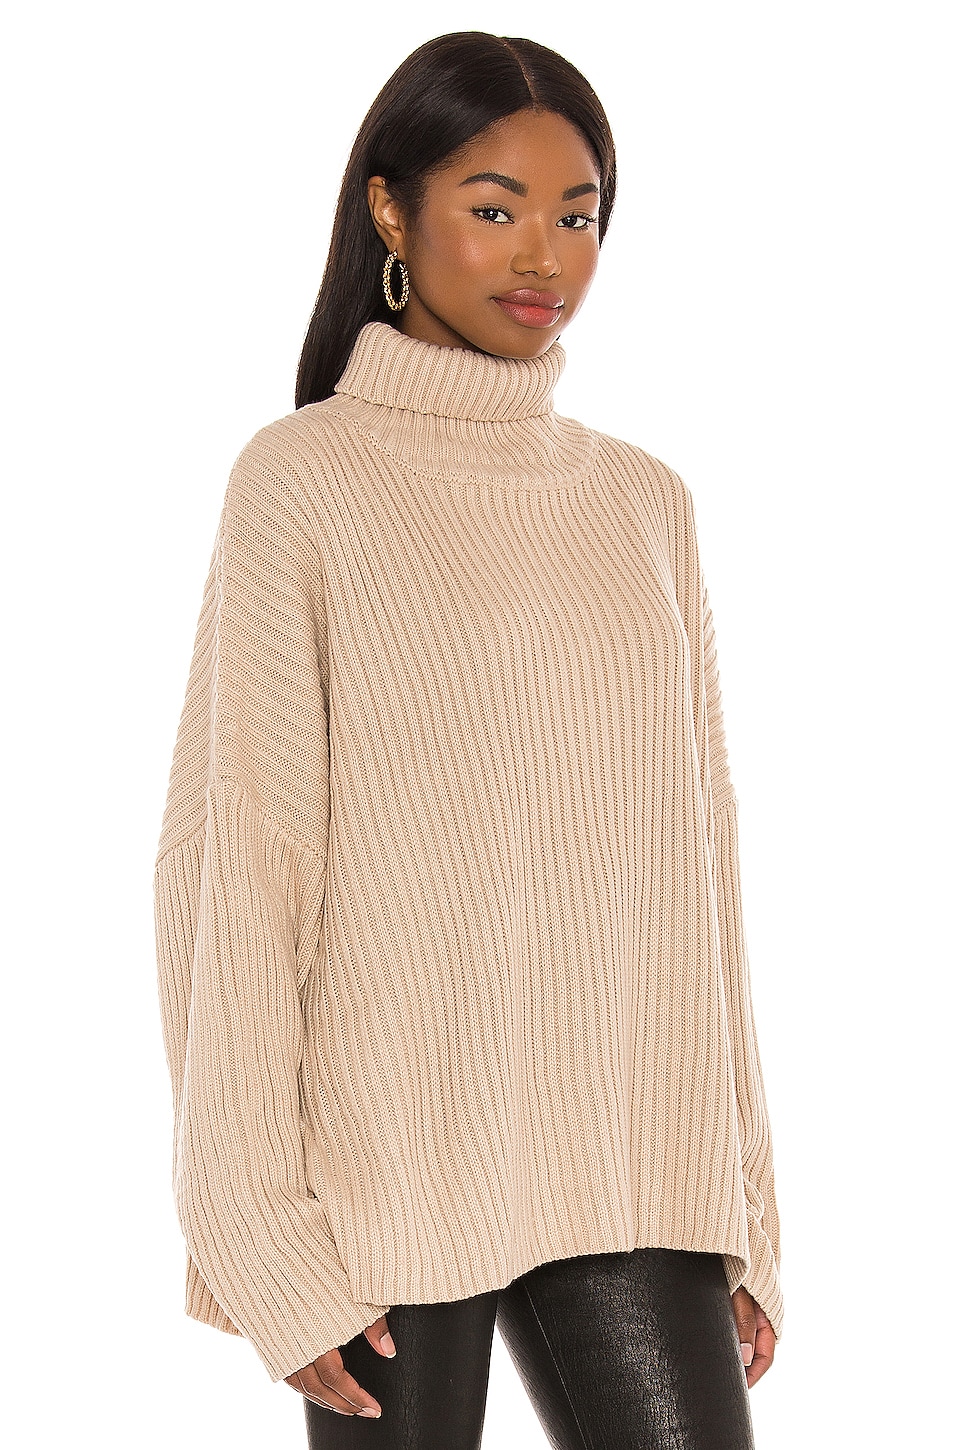 LBLC The Label Casey Sweater in Oatmeal | REVOLVE